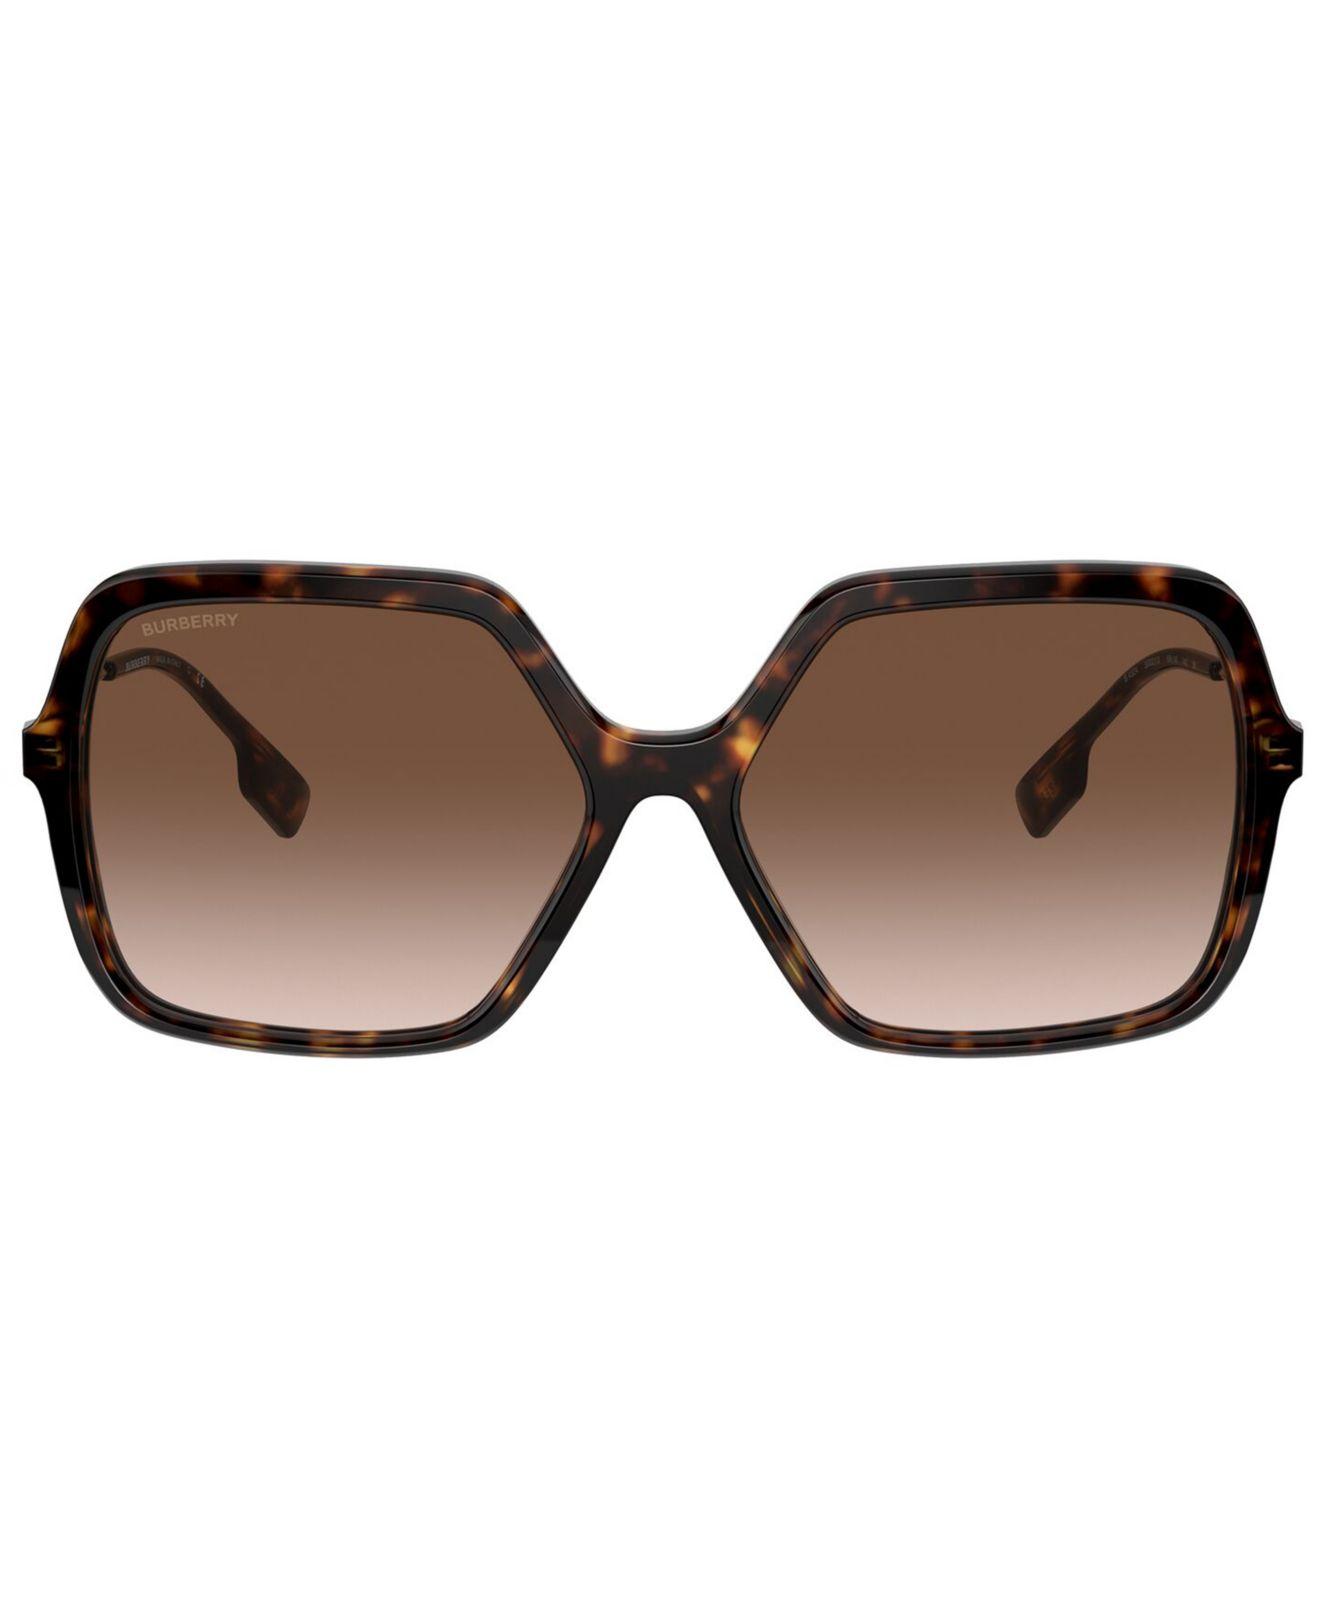 Burberry Synthetic Isabella Sunglasses, Be4324 59 in Brown - Lyst